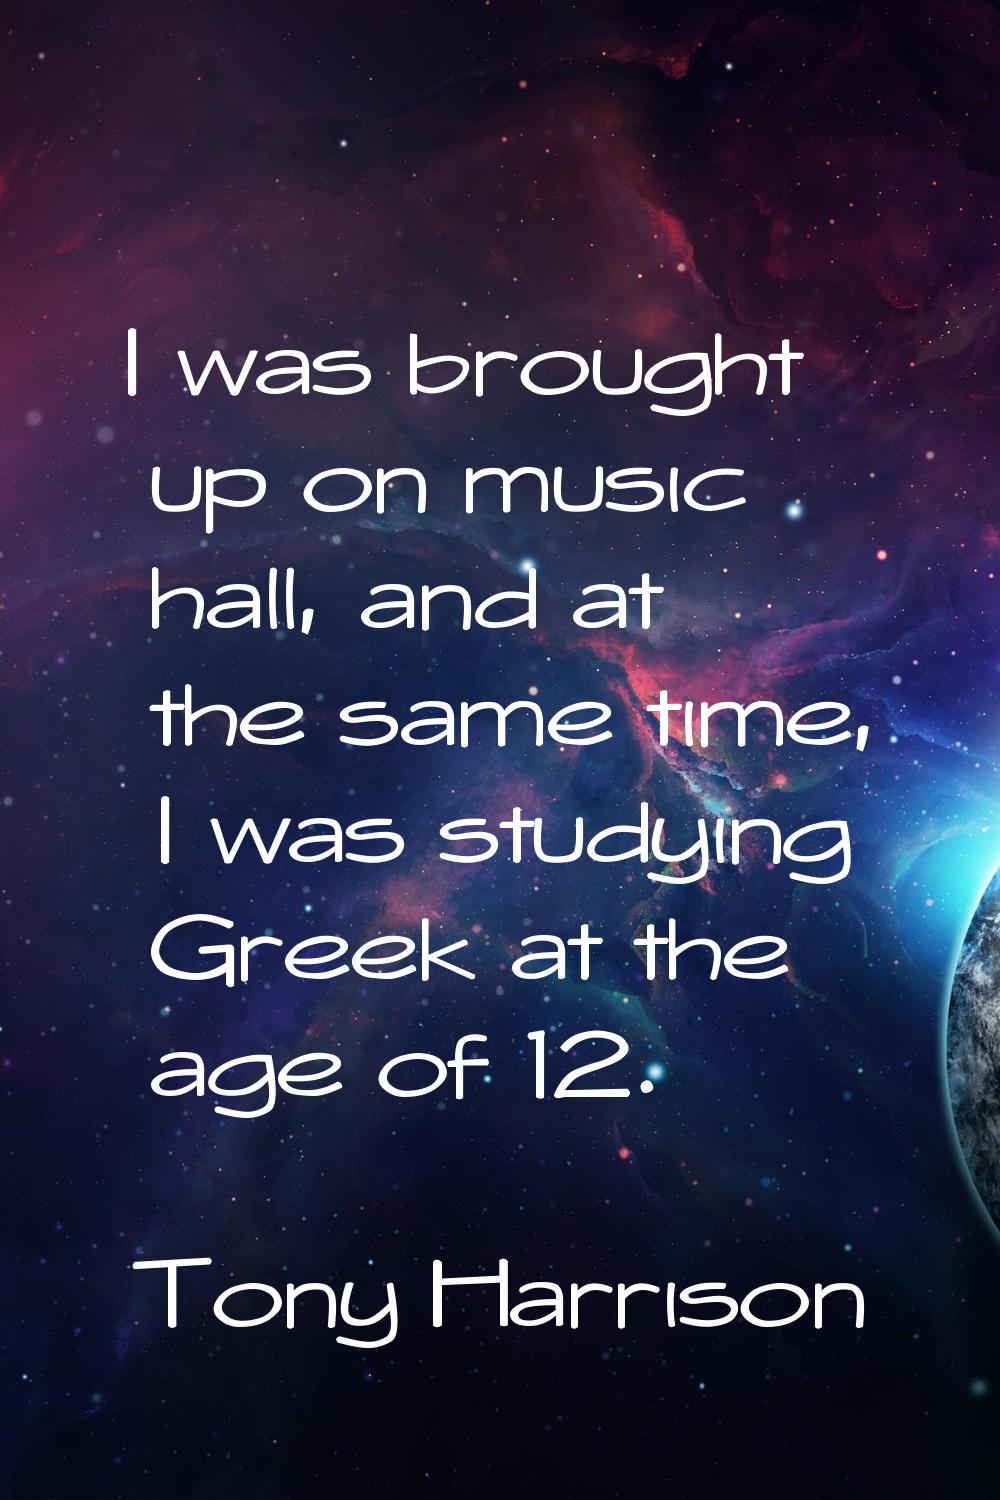 I was brought up on music hall, and at the same time, I was studying Greek at the age of 12.